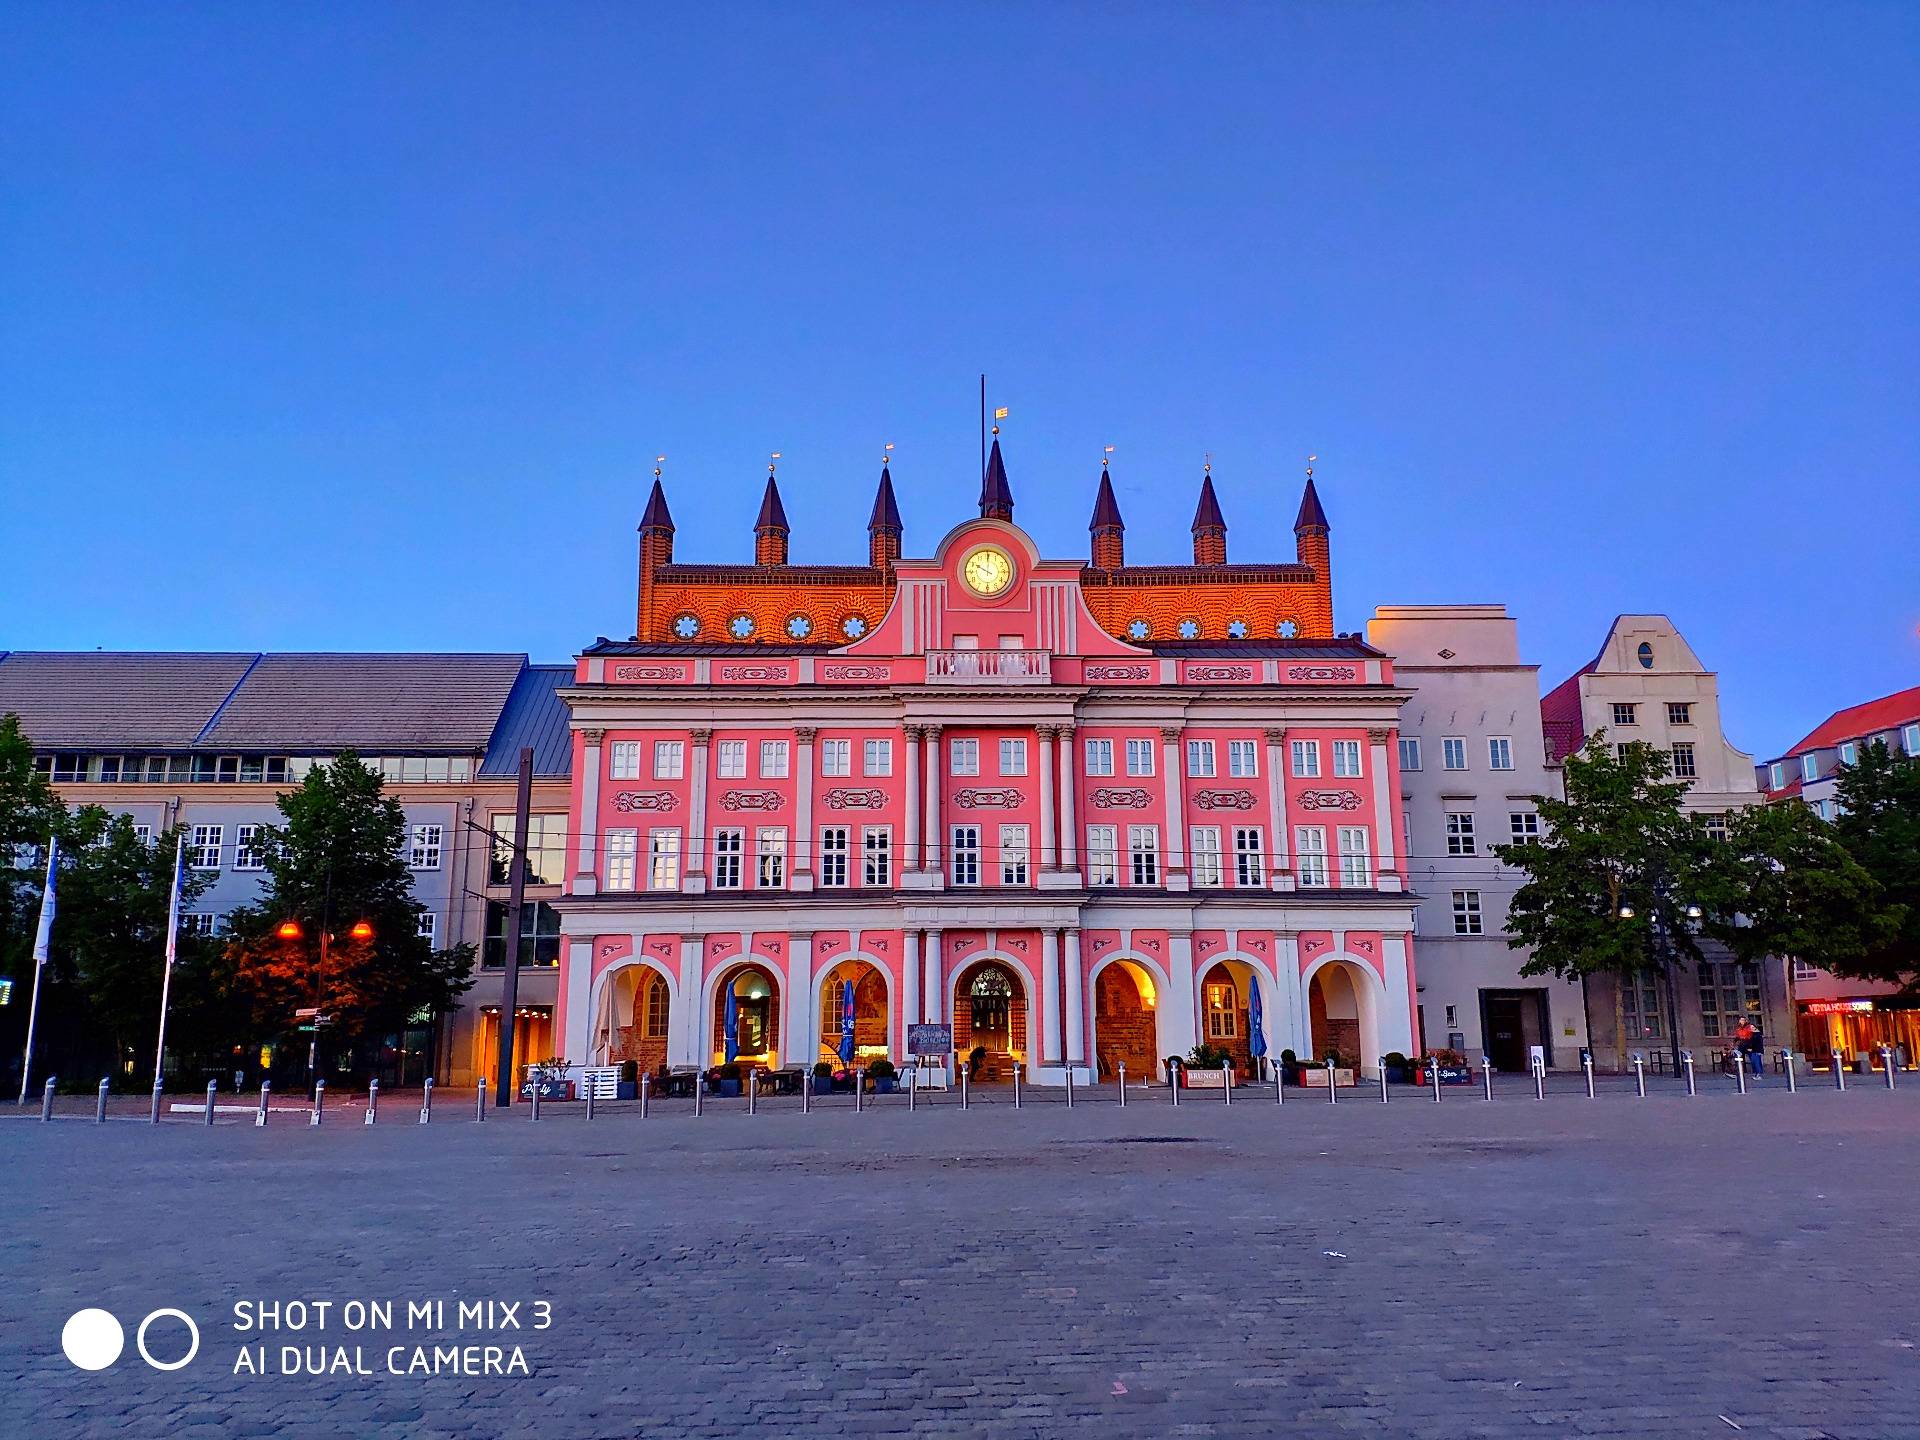 The famous city hall in Rostock